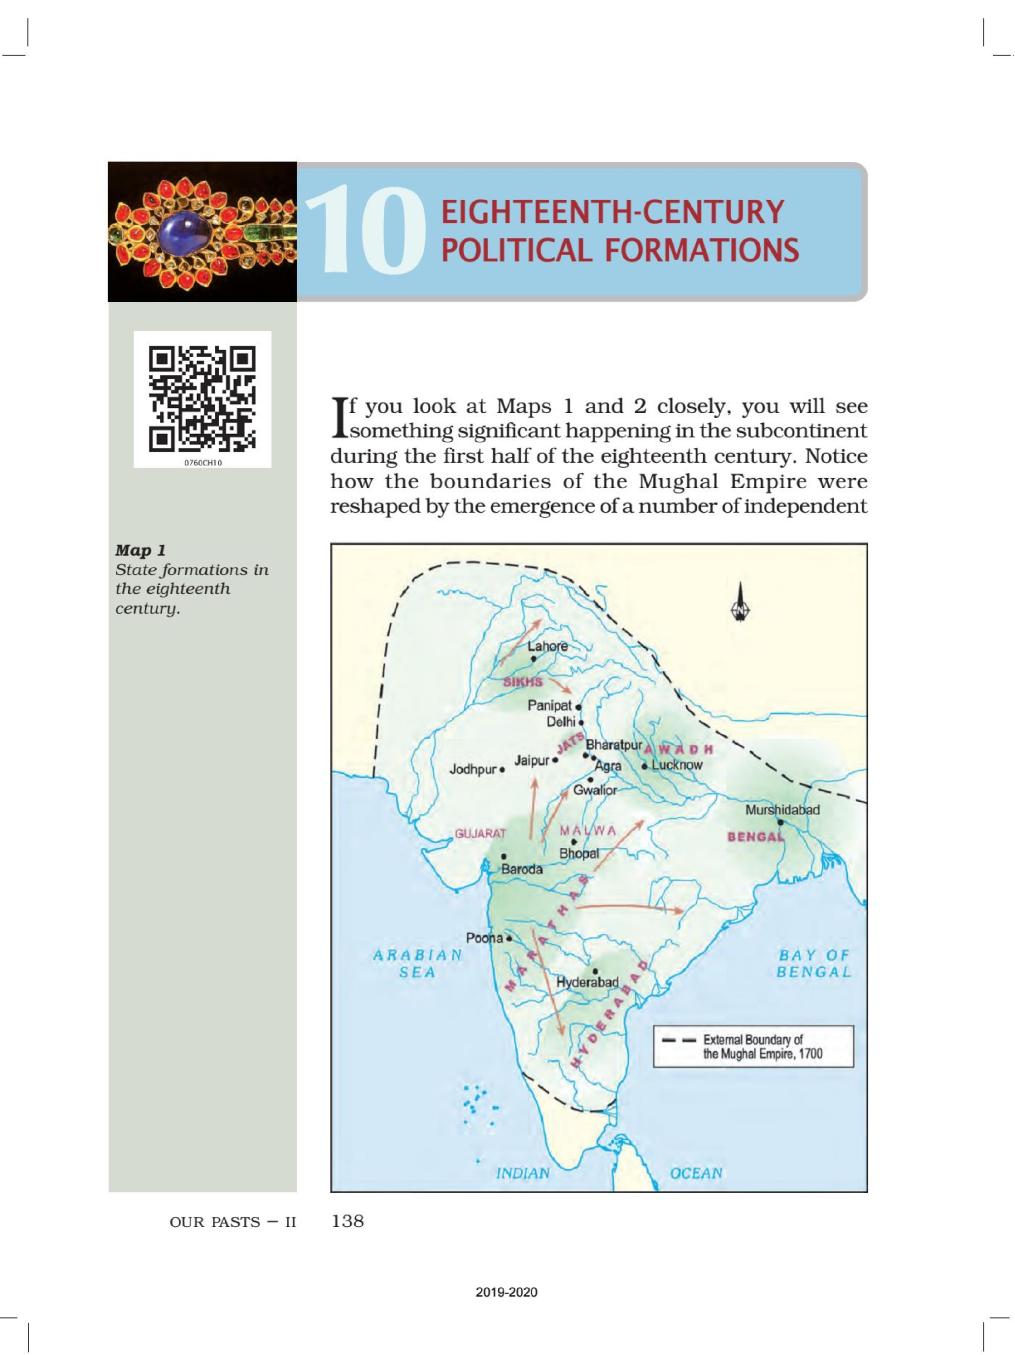 NCERT Book Class 7 Social Science (History) Chapter 10 Eighteenth-Century Political Formations - Page 1